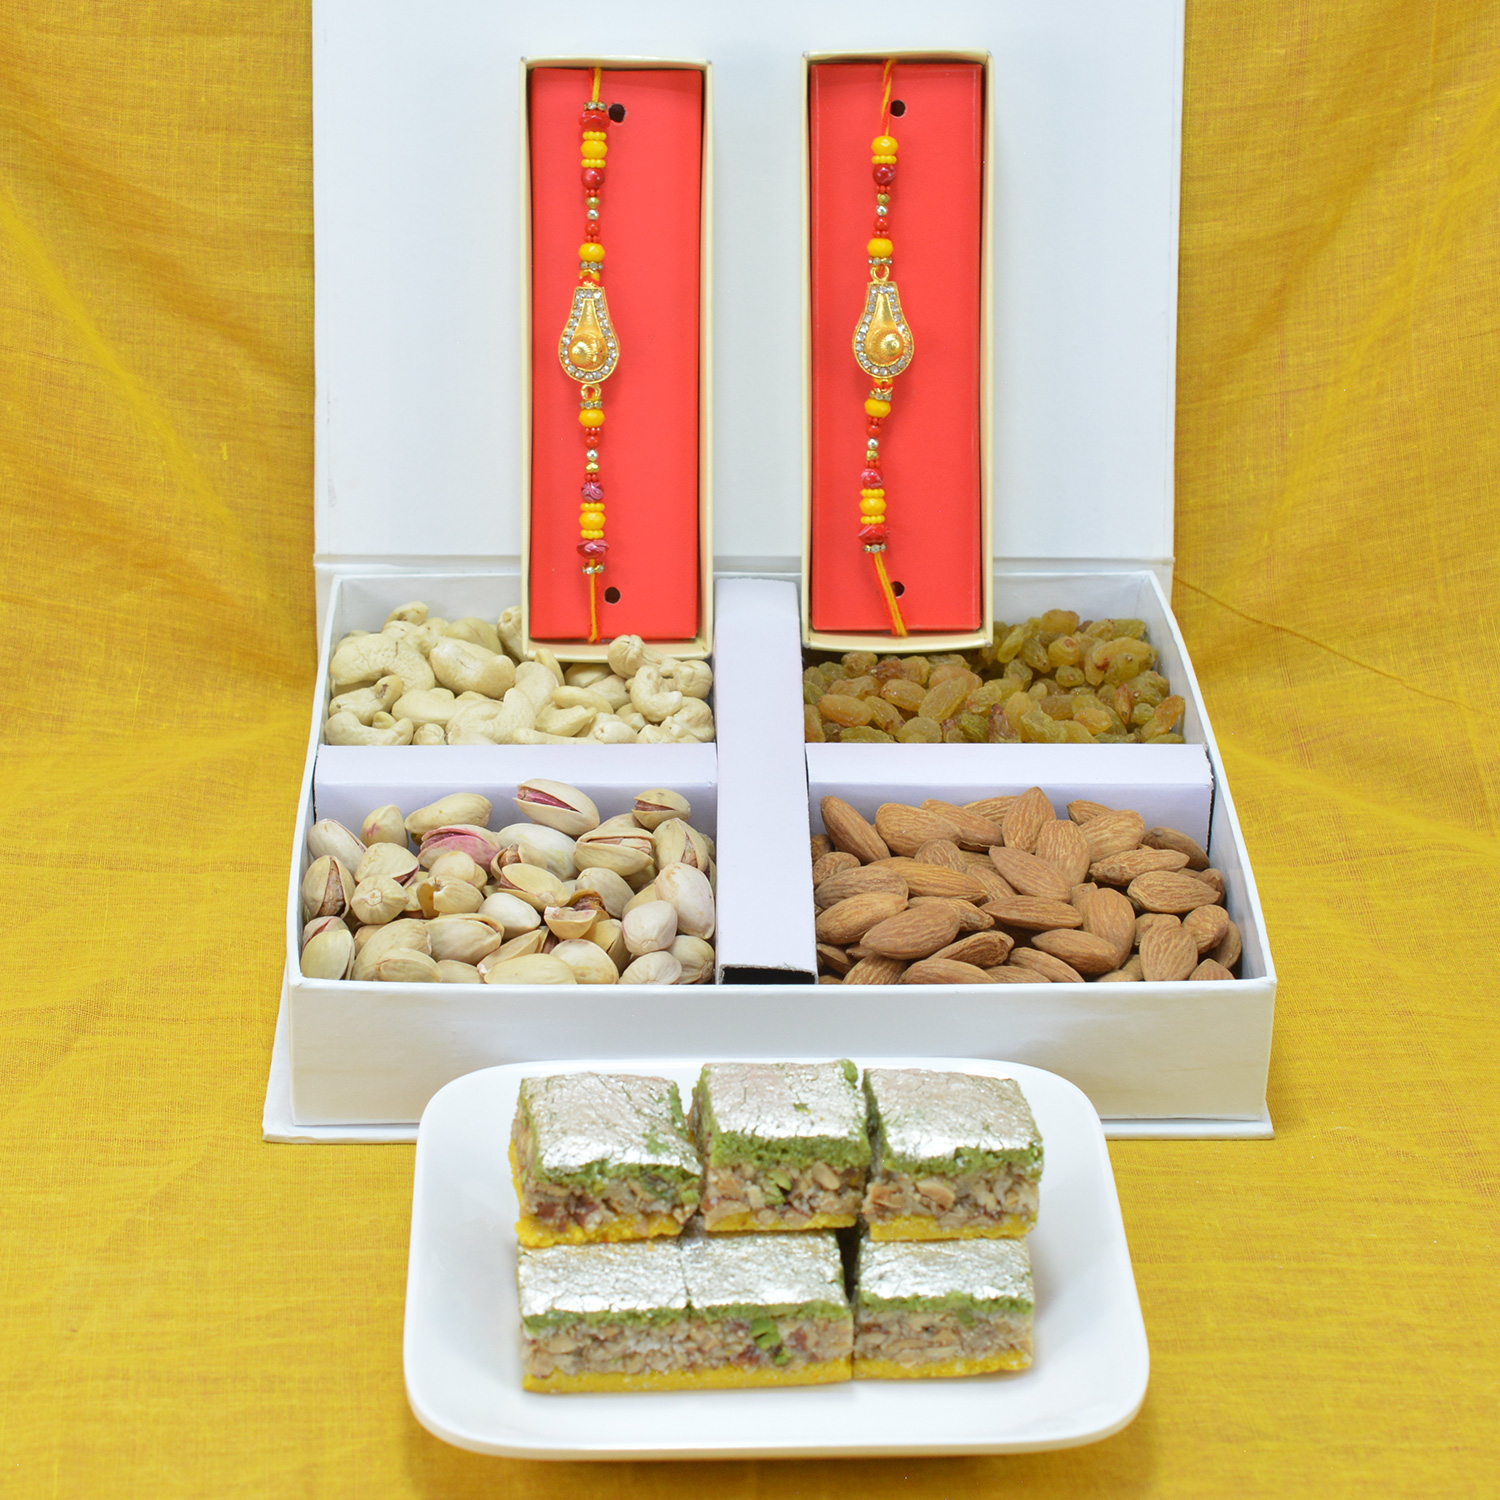 Piquant Badam Pista Barfi with Delicious 4 Type of Mix Dry Fruit along with Multicolor Beads Rakhi Hamper